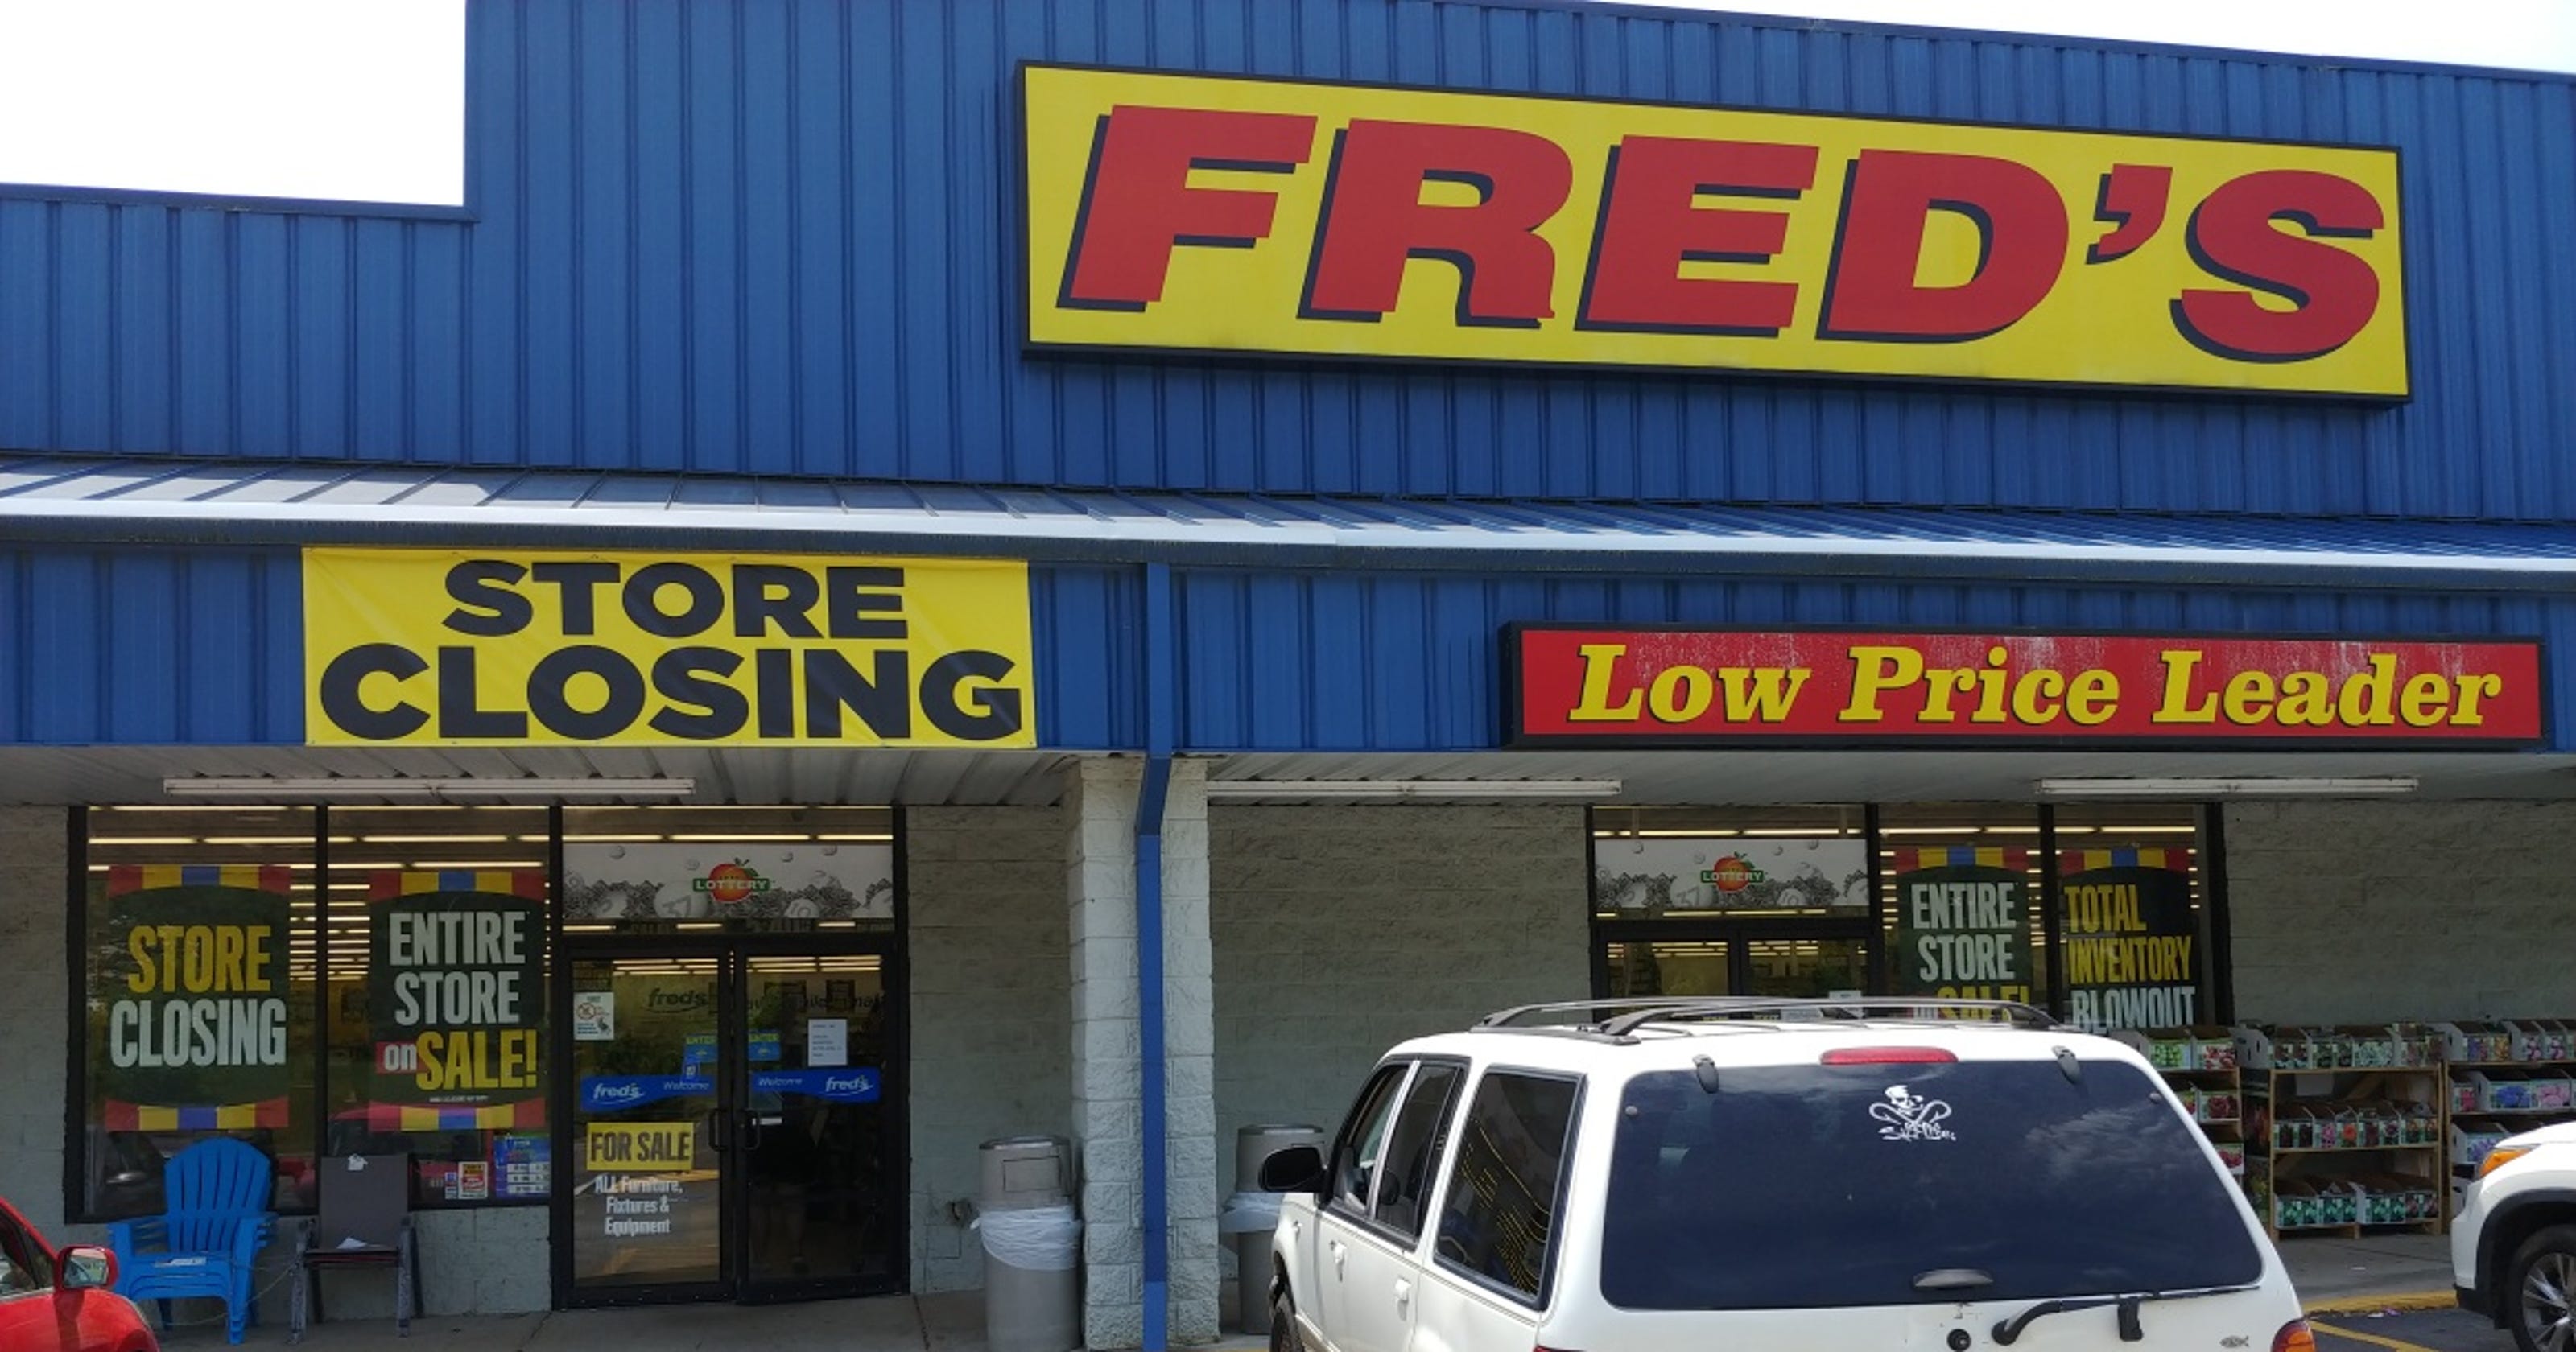 online-grocery-shopping-coming-to-seattle-fred-meyer-location-blocks